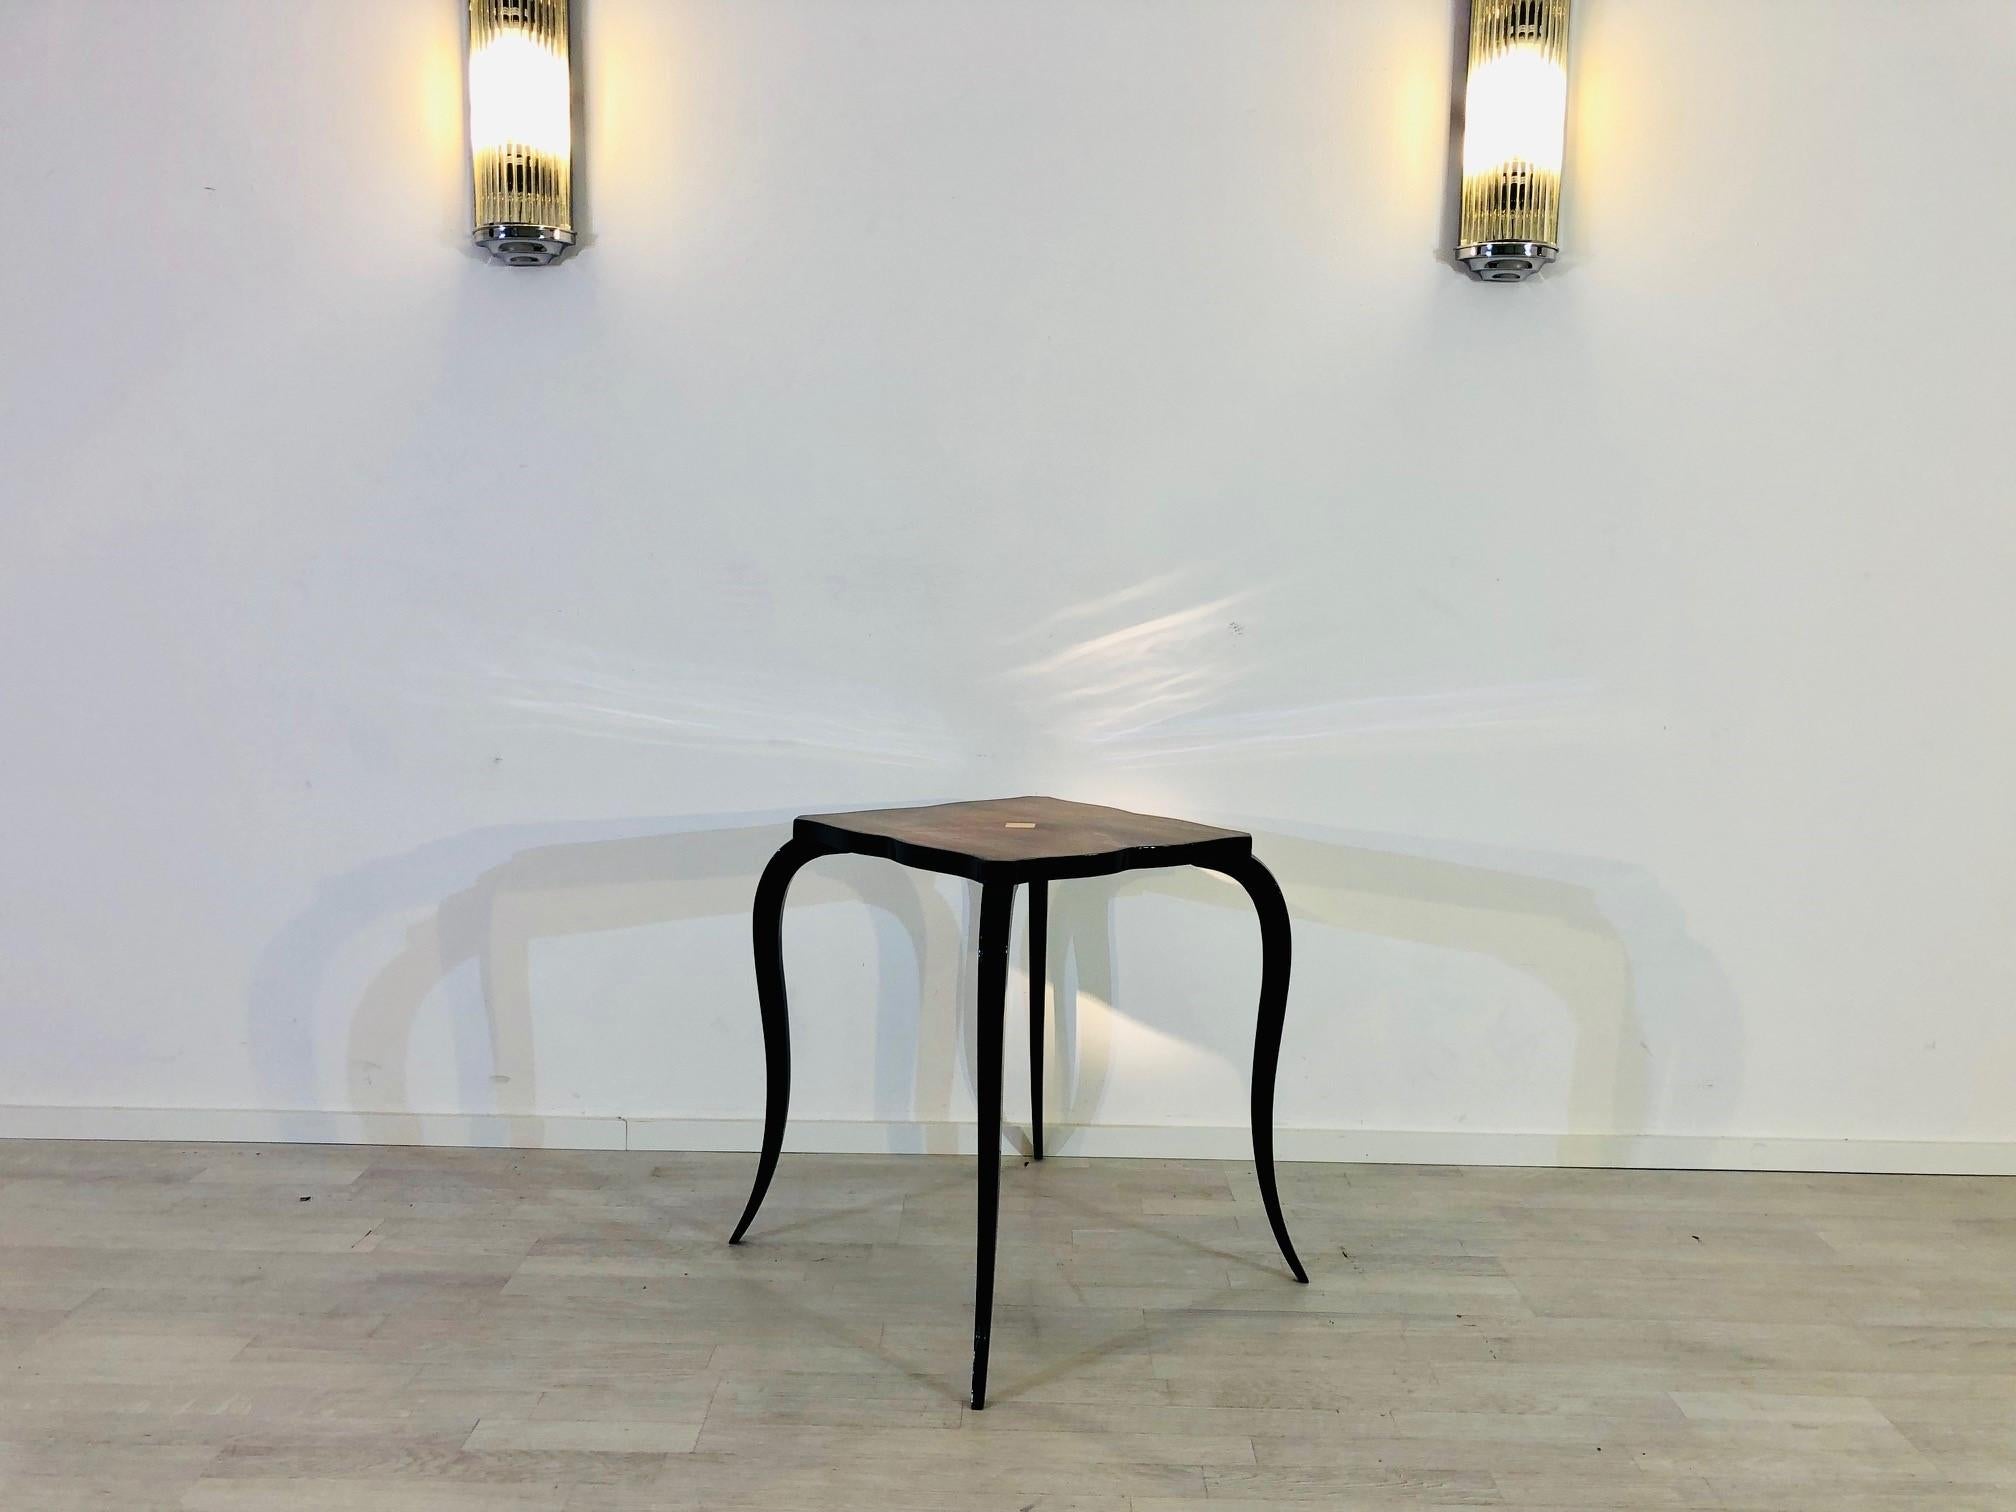 Small Art Deco side table from France. Wonderful crafted piece of furniture with a unique form and great details like a recessed check pattern in the middle of the table. The curved legs excel this single piece!

 Great contrast - black piano